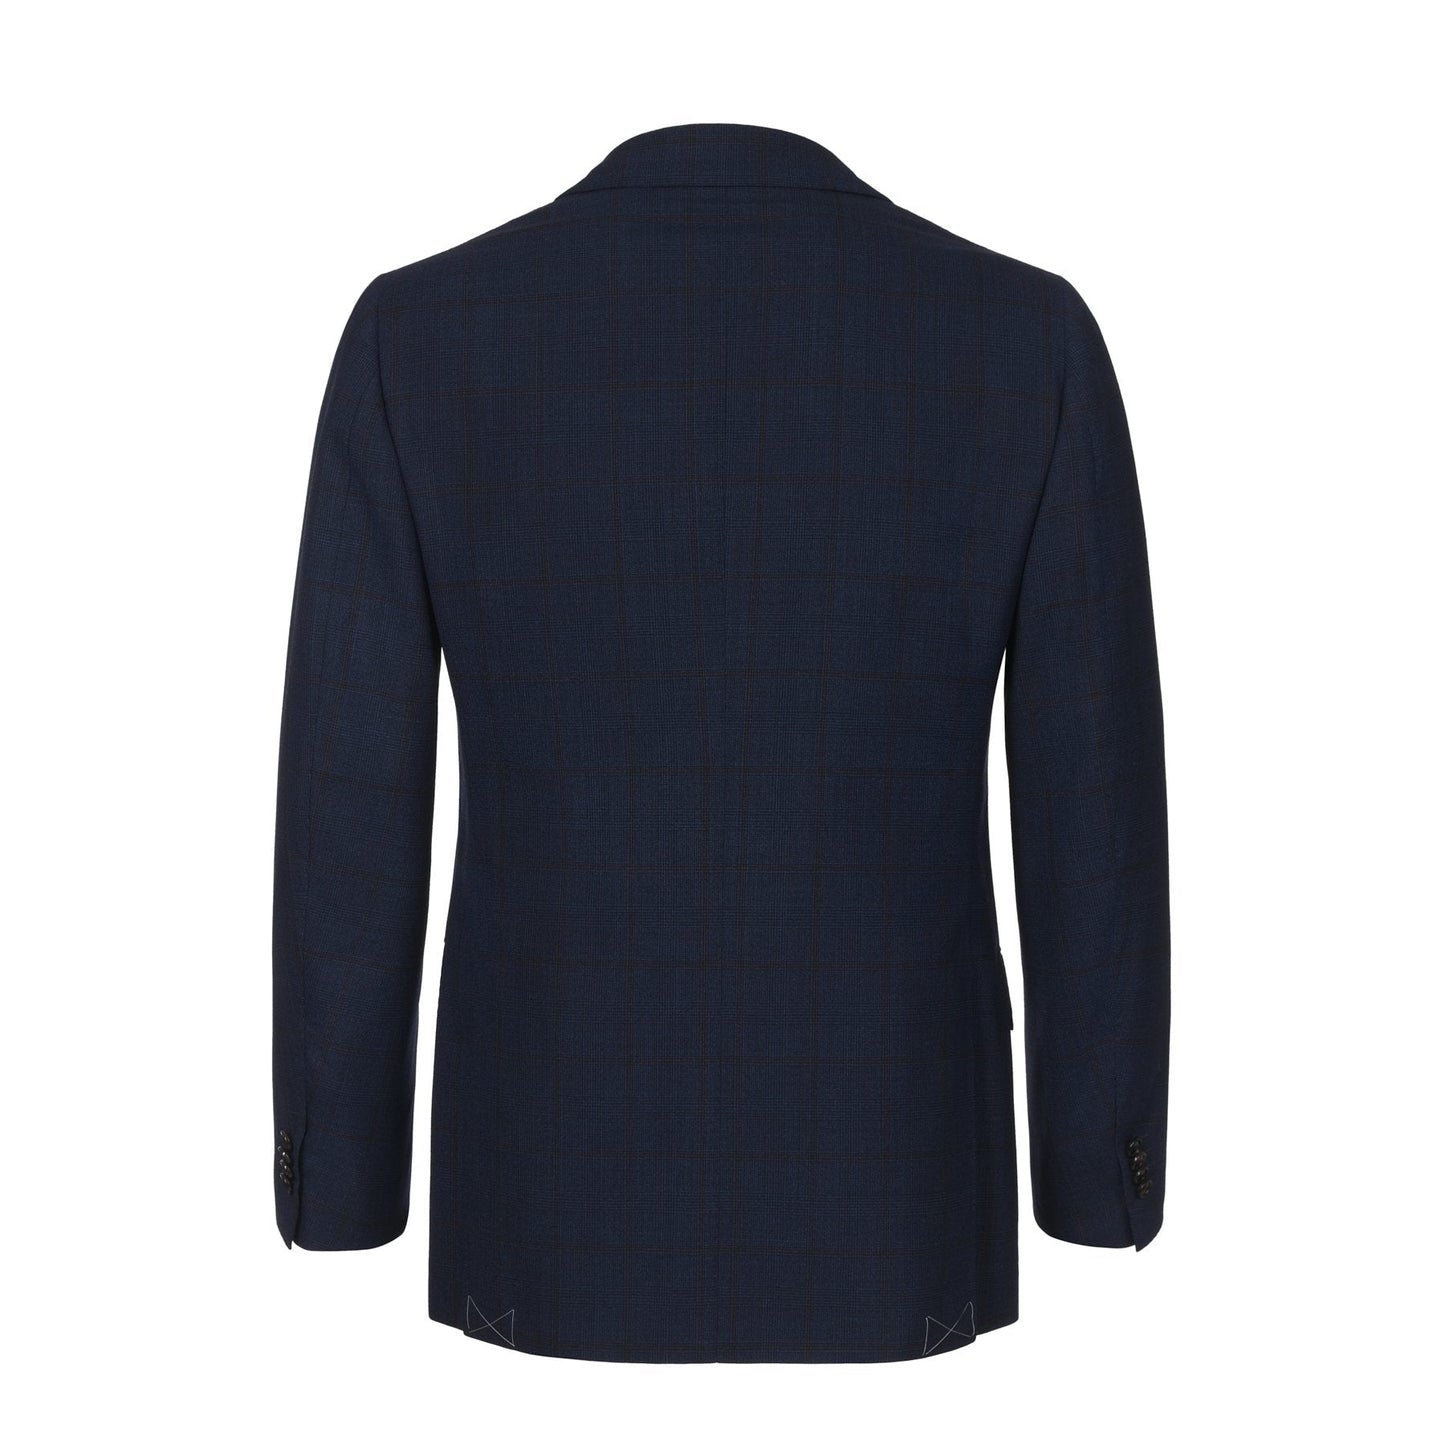 Single-Breasted Glen-Check Wool and Cashmere-Blend Suit in Dark Blue